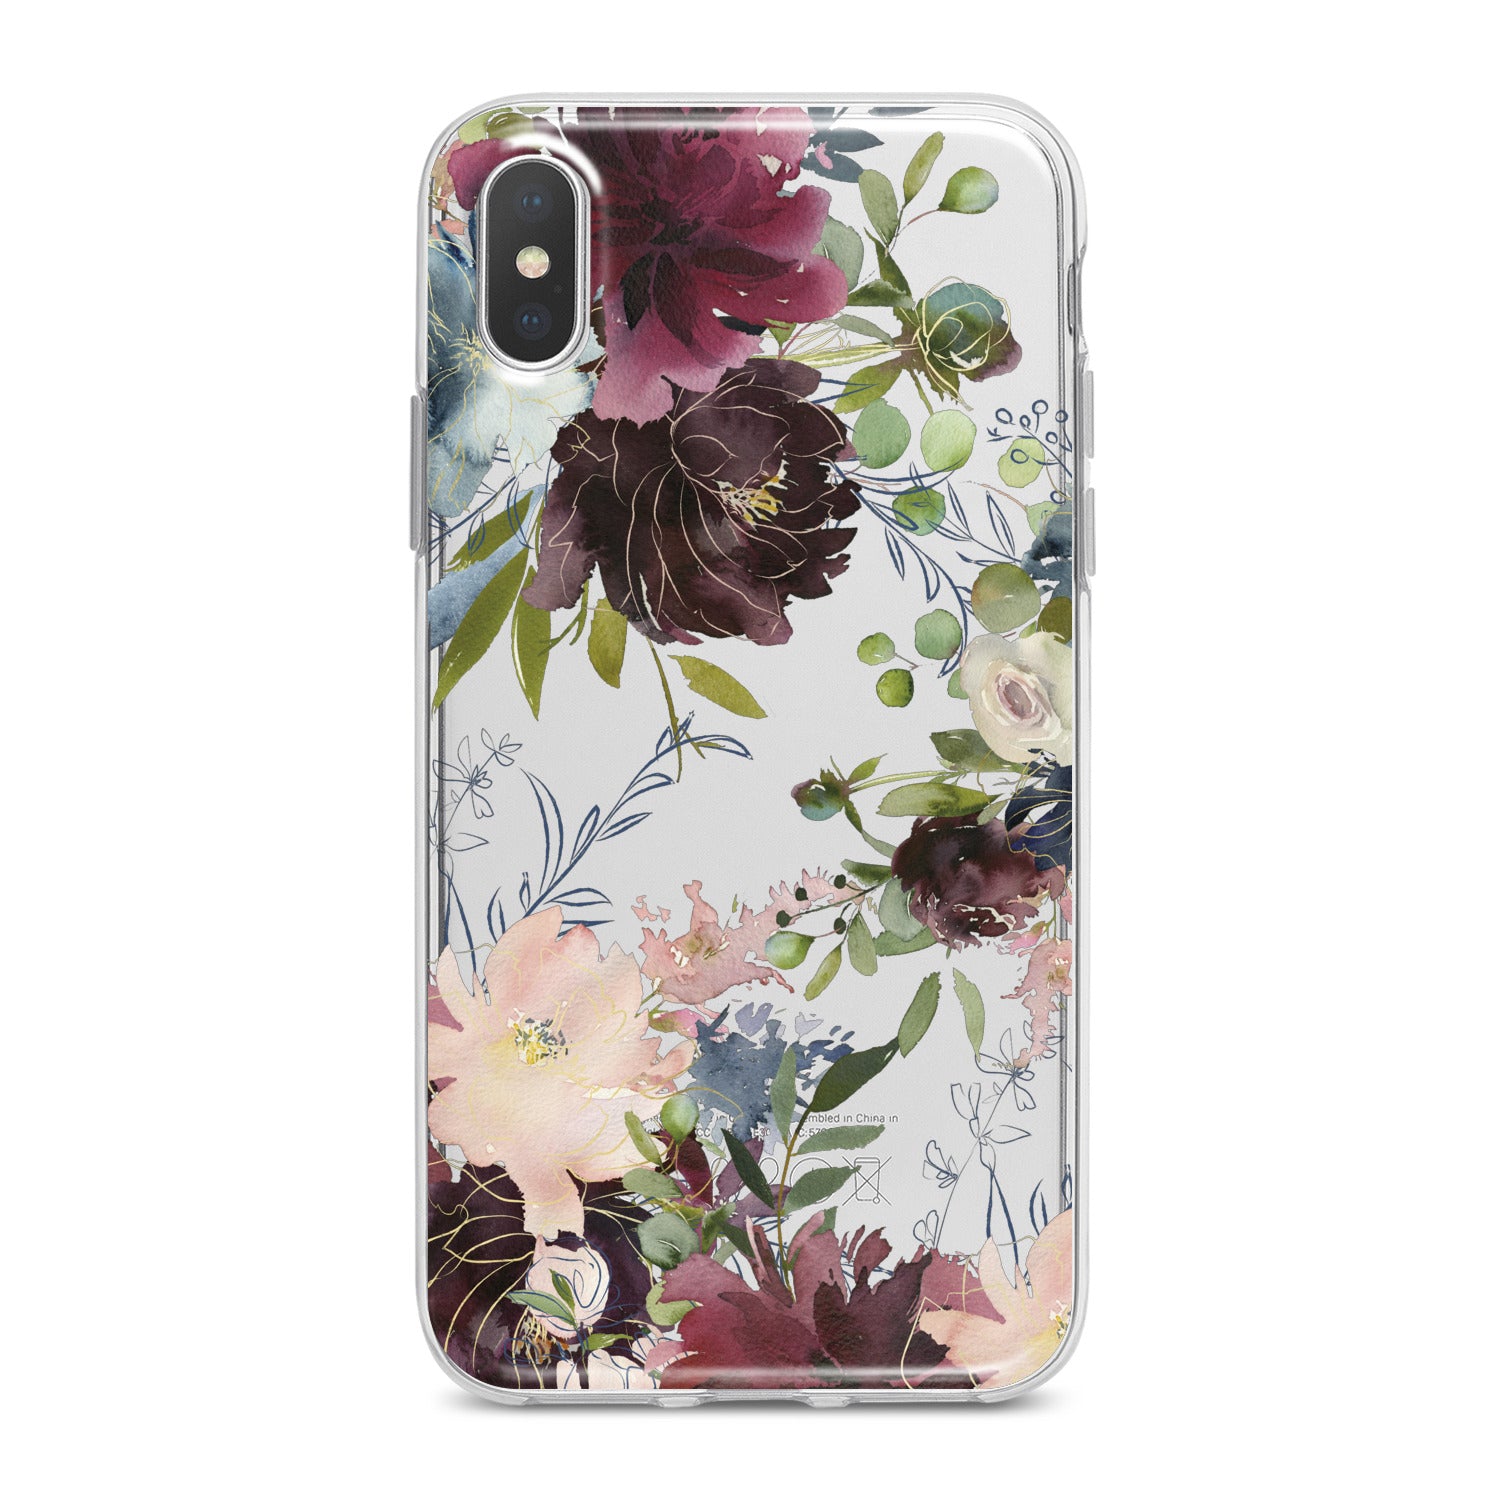 Lex Altern Purple Flowers Phone Case for your iPhone & Android phone.